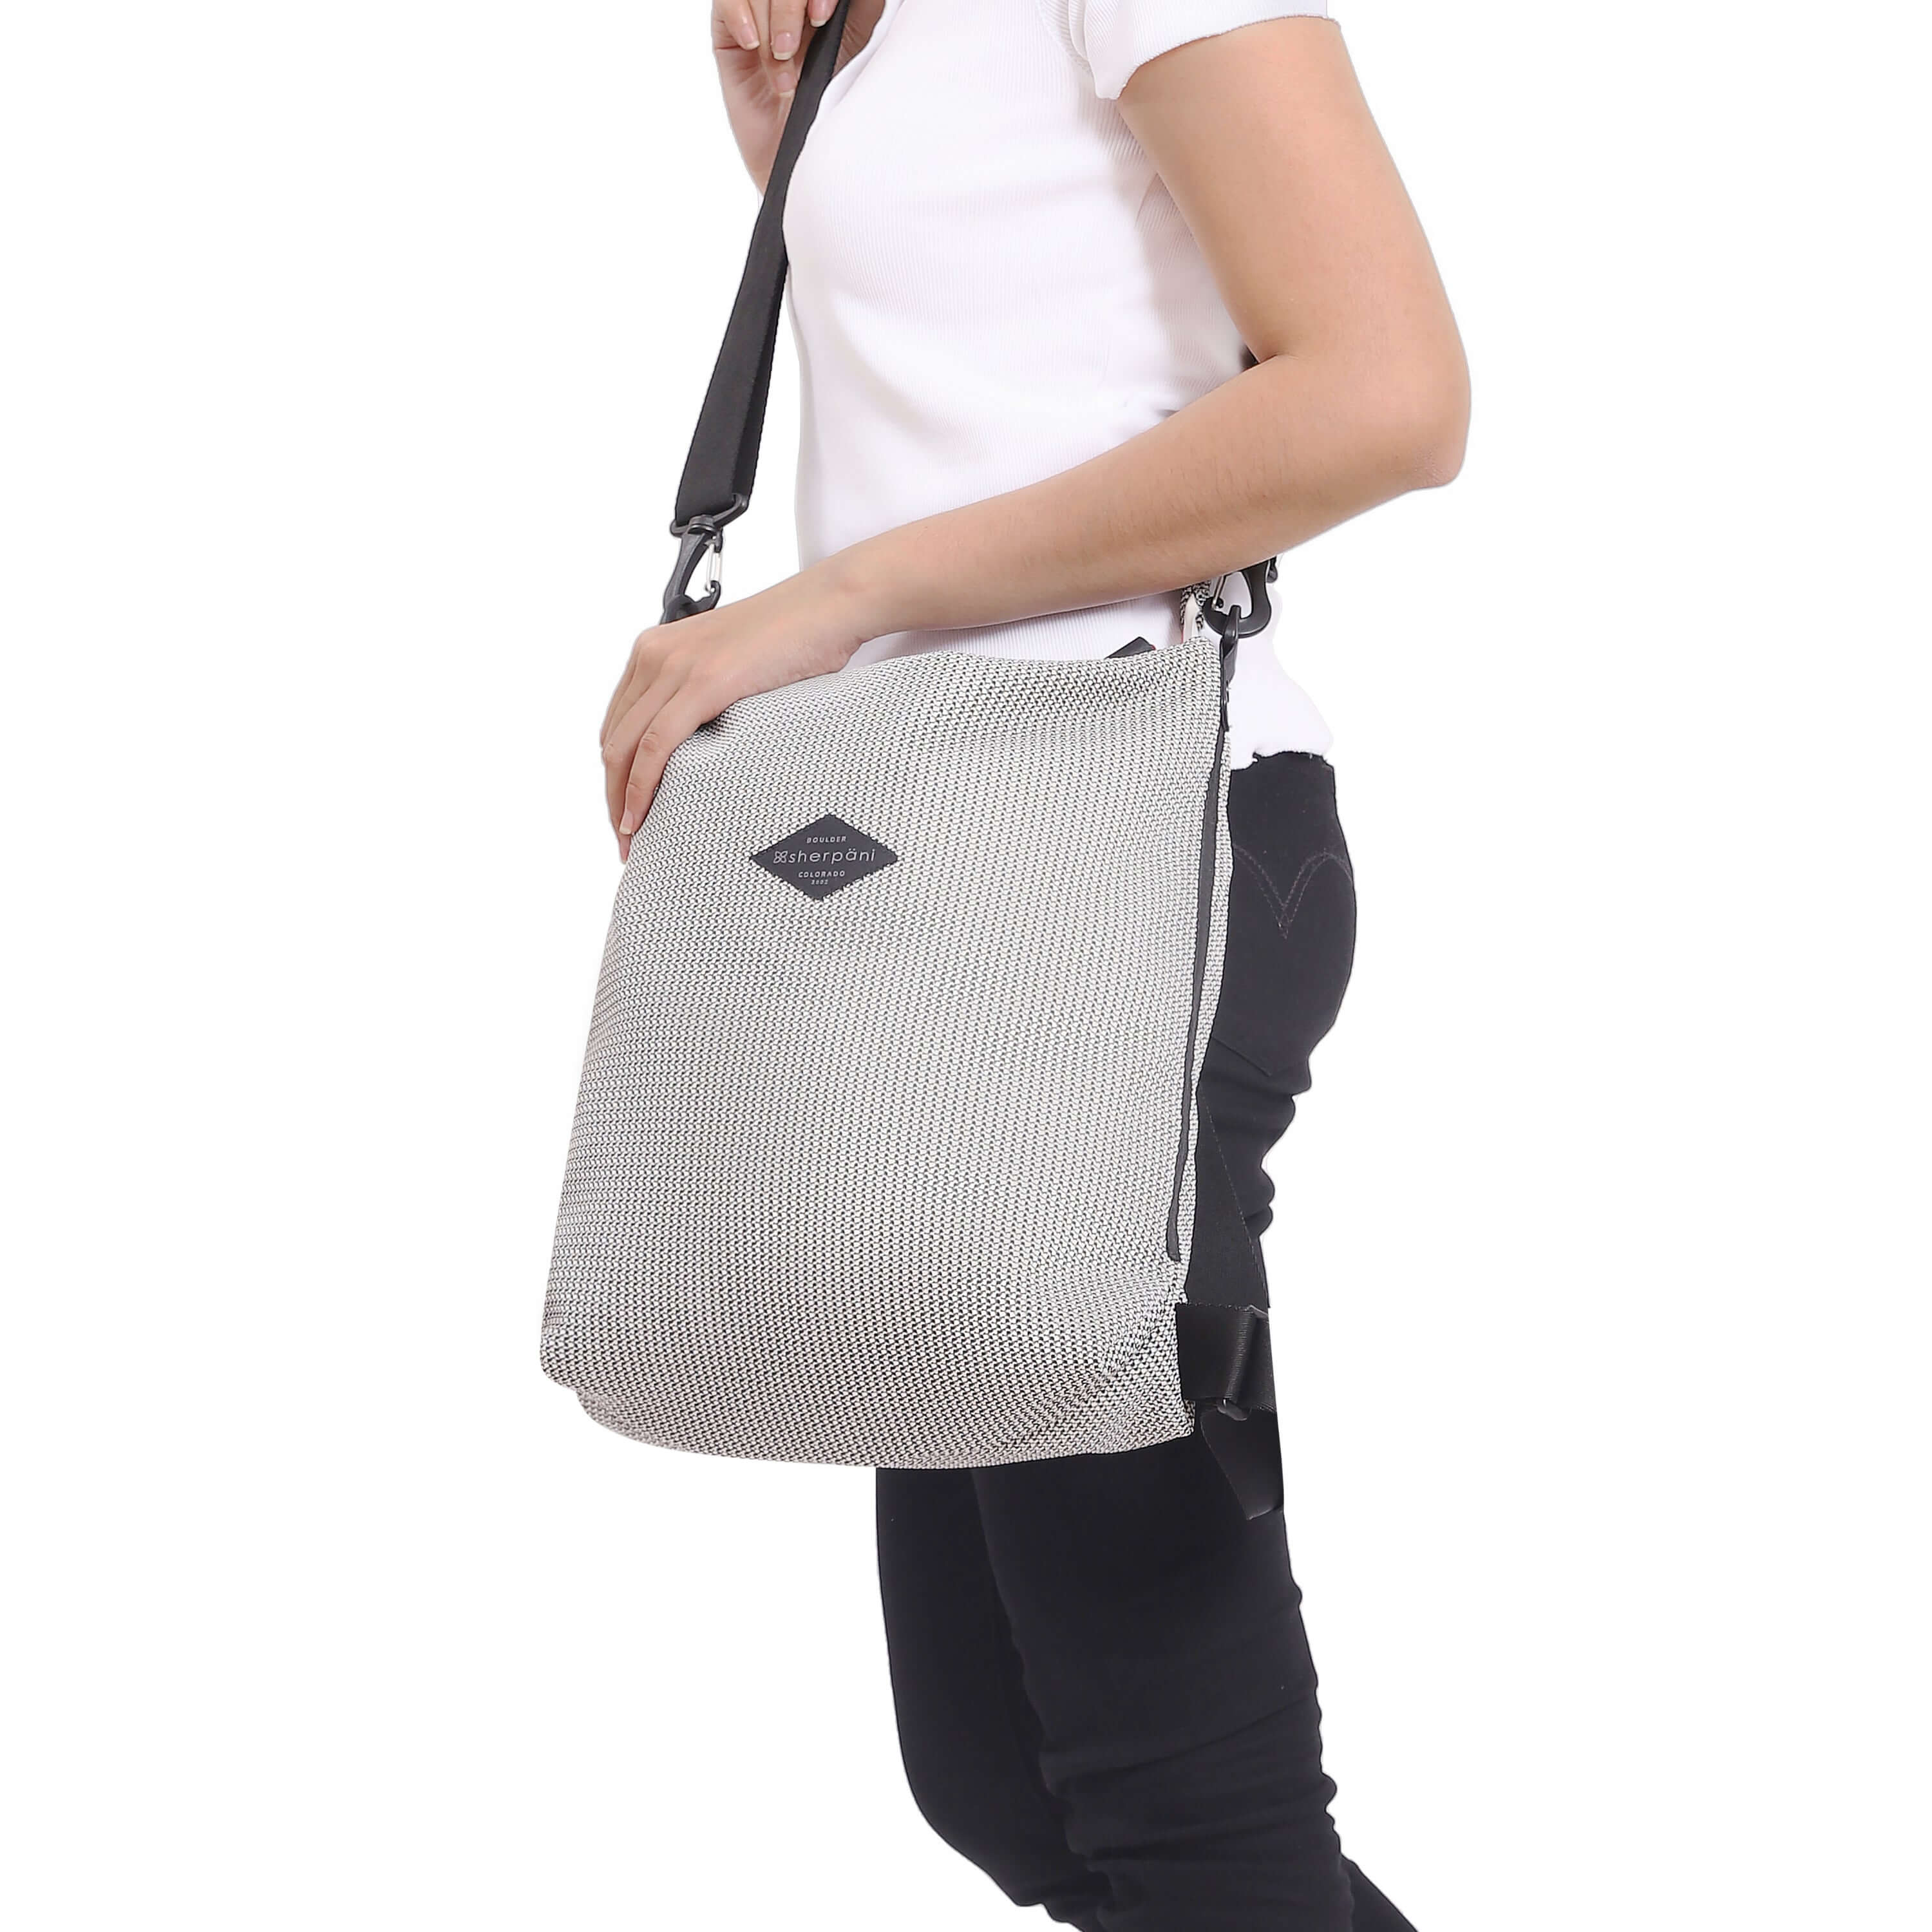 Close up view of a model facing the side. She is wearing a white tee shirt and black pants. She carries Sherpani mesh convertible bag, the Delanie, as a crossbody.